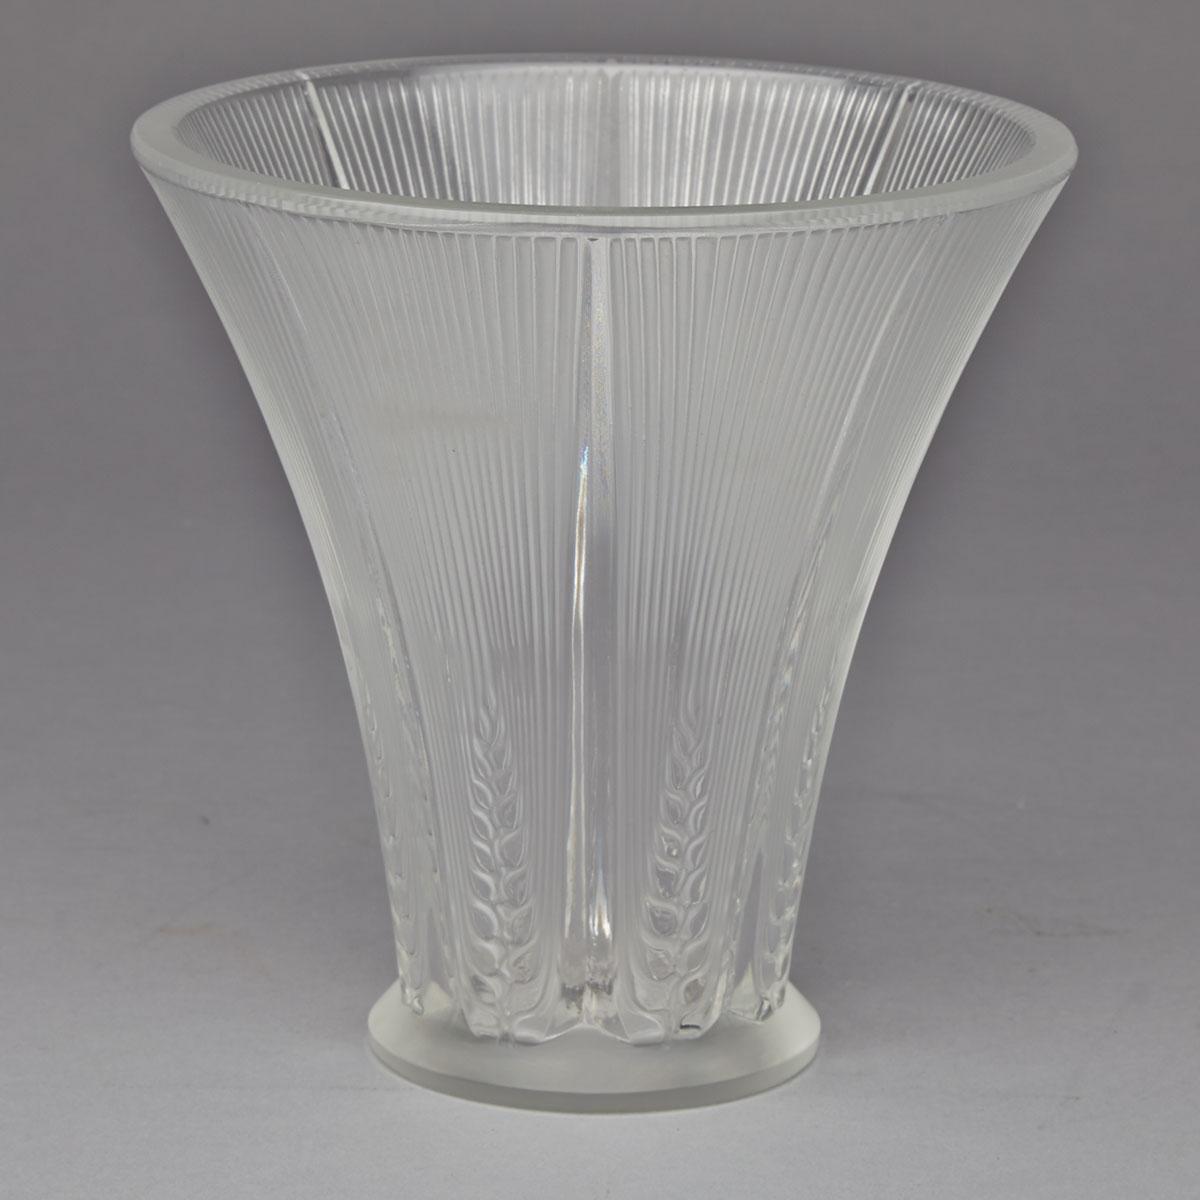 ‘Epis’, Lalique Moulded and Partly Frosted Glass Vase, post-1945